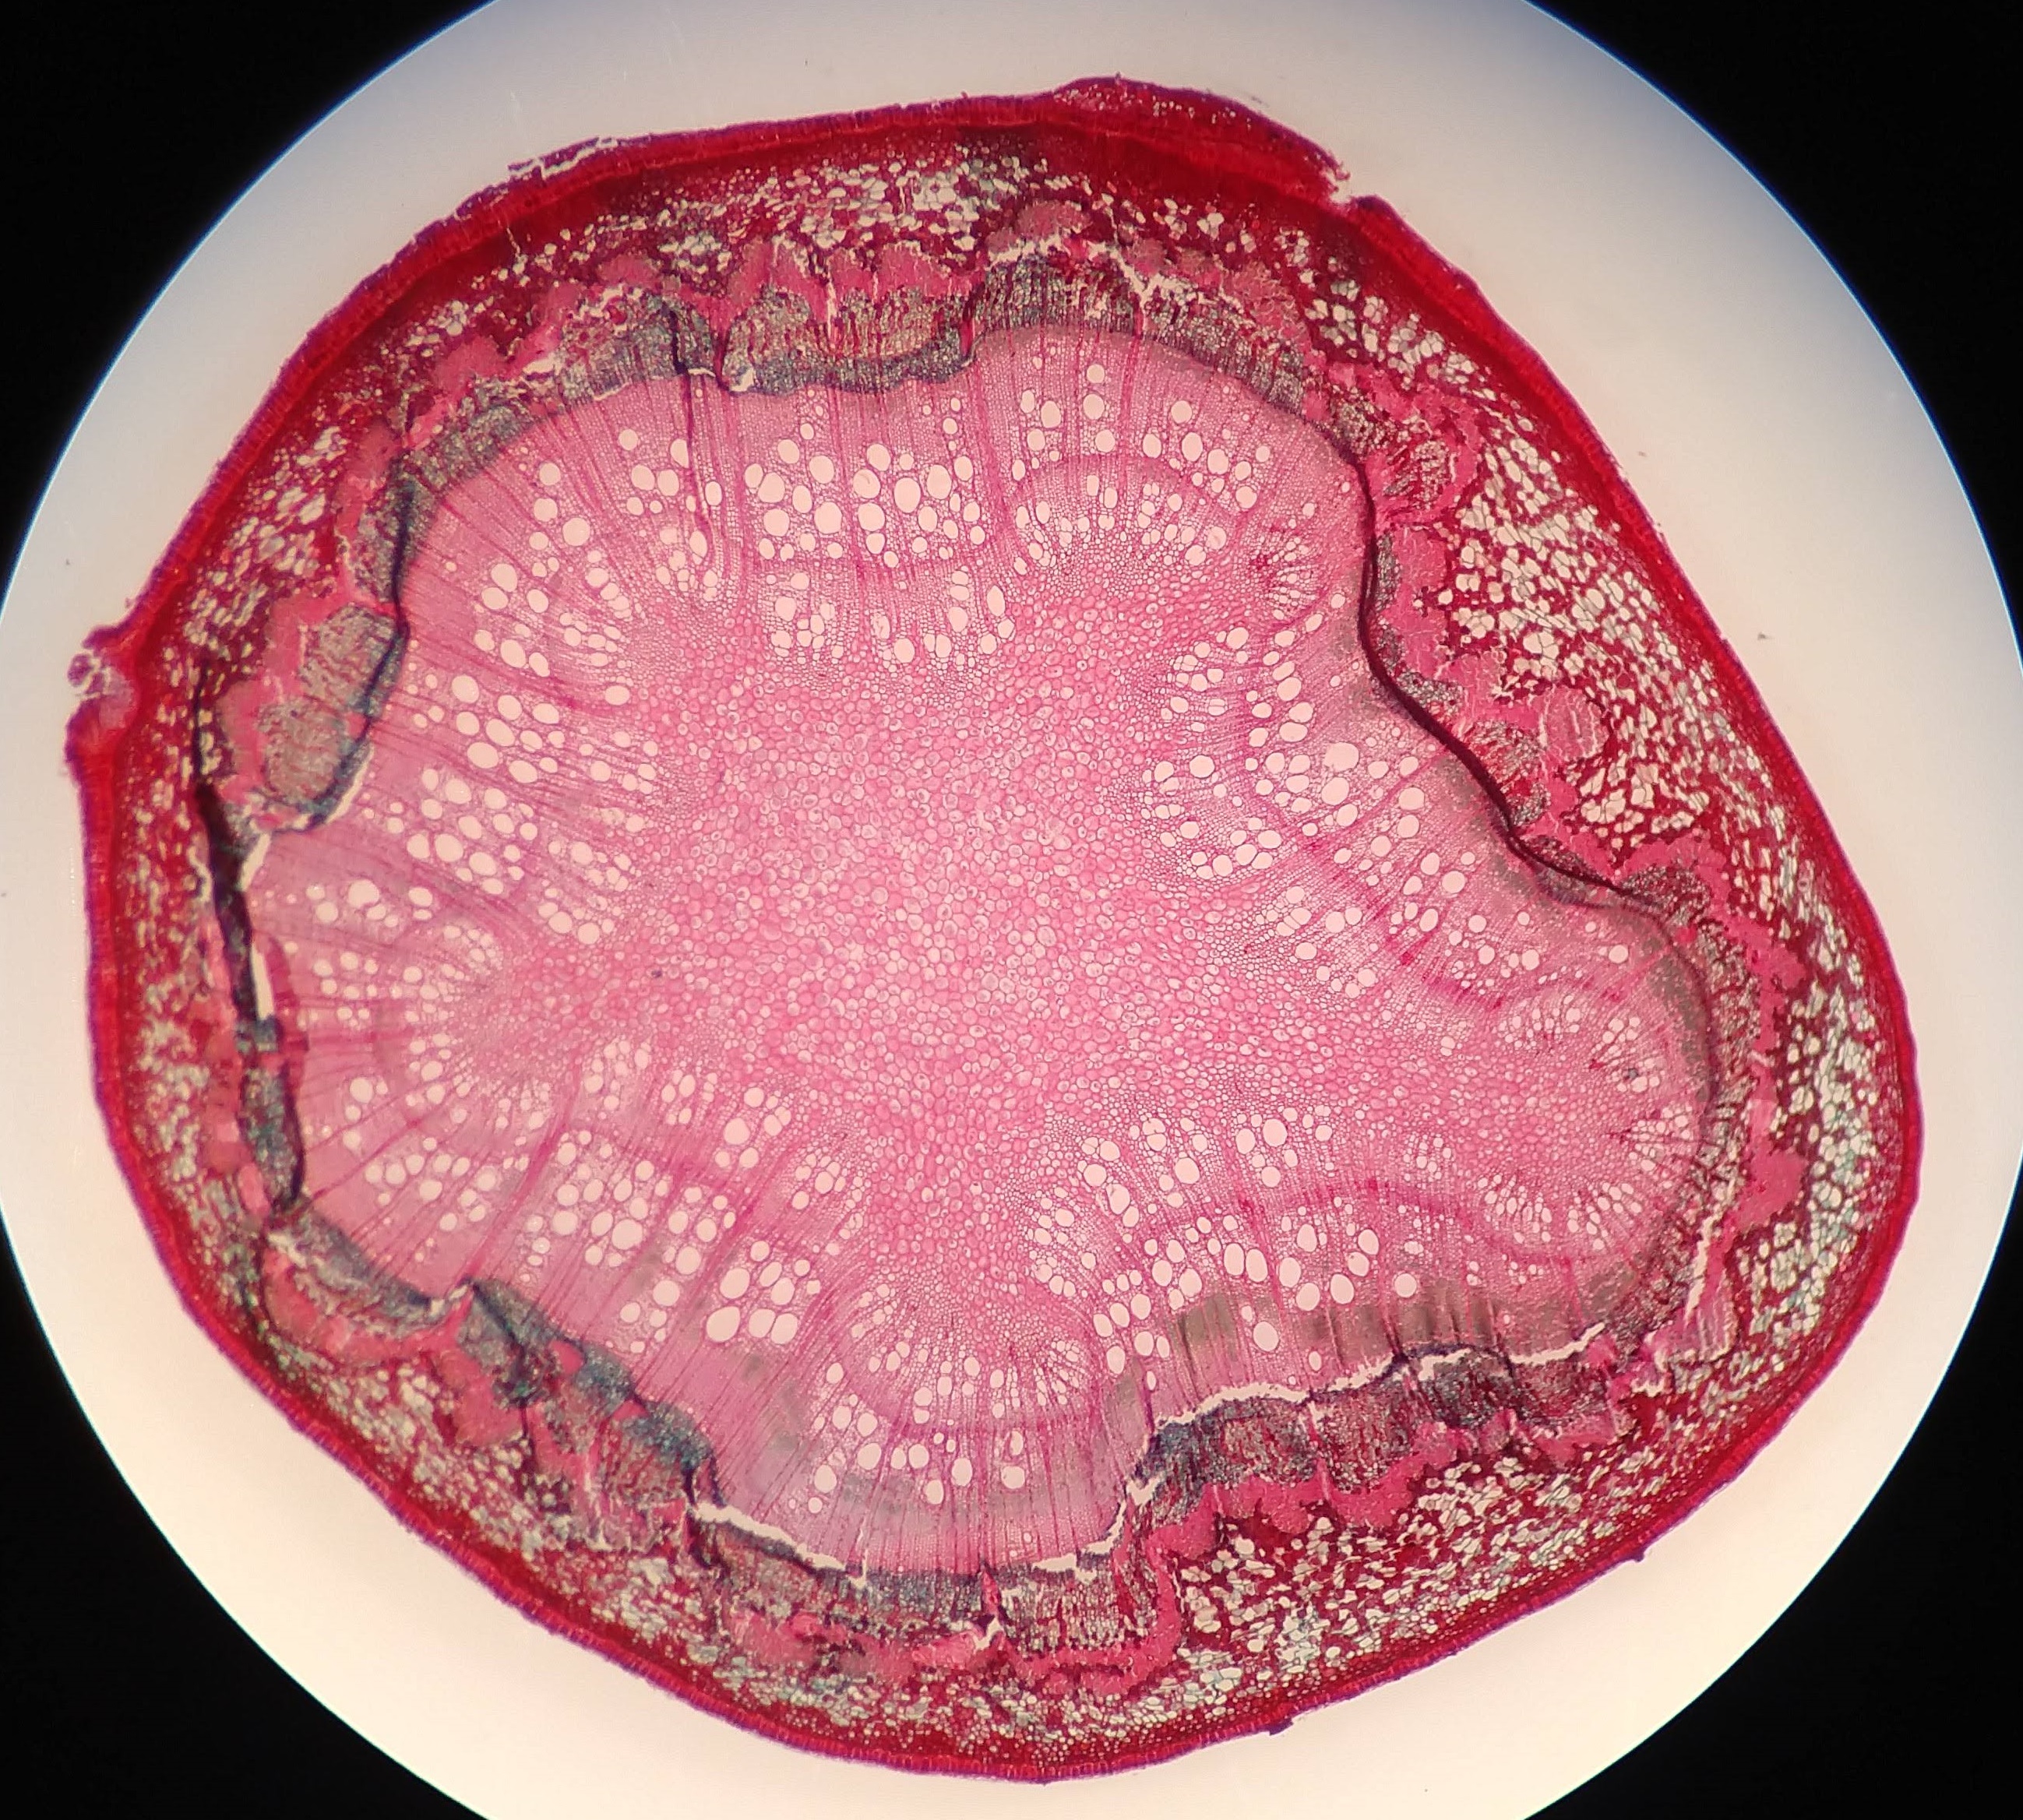 A cross section of a woody angiosperm stem